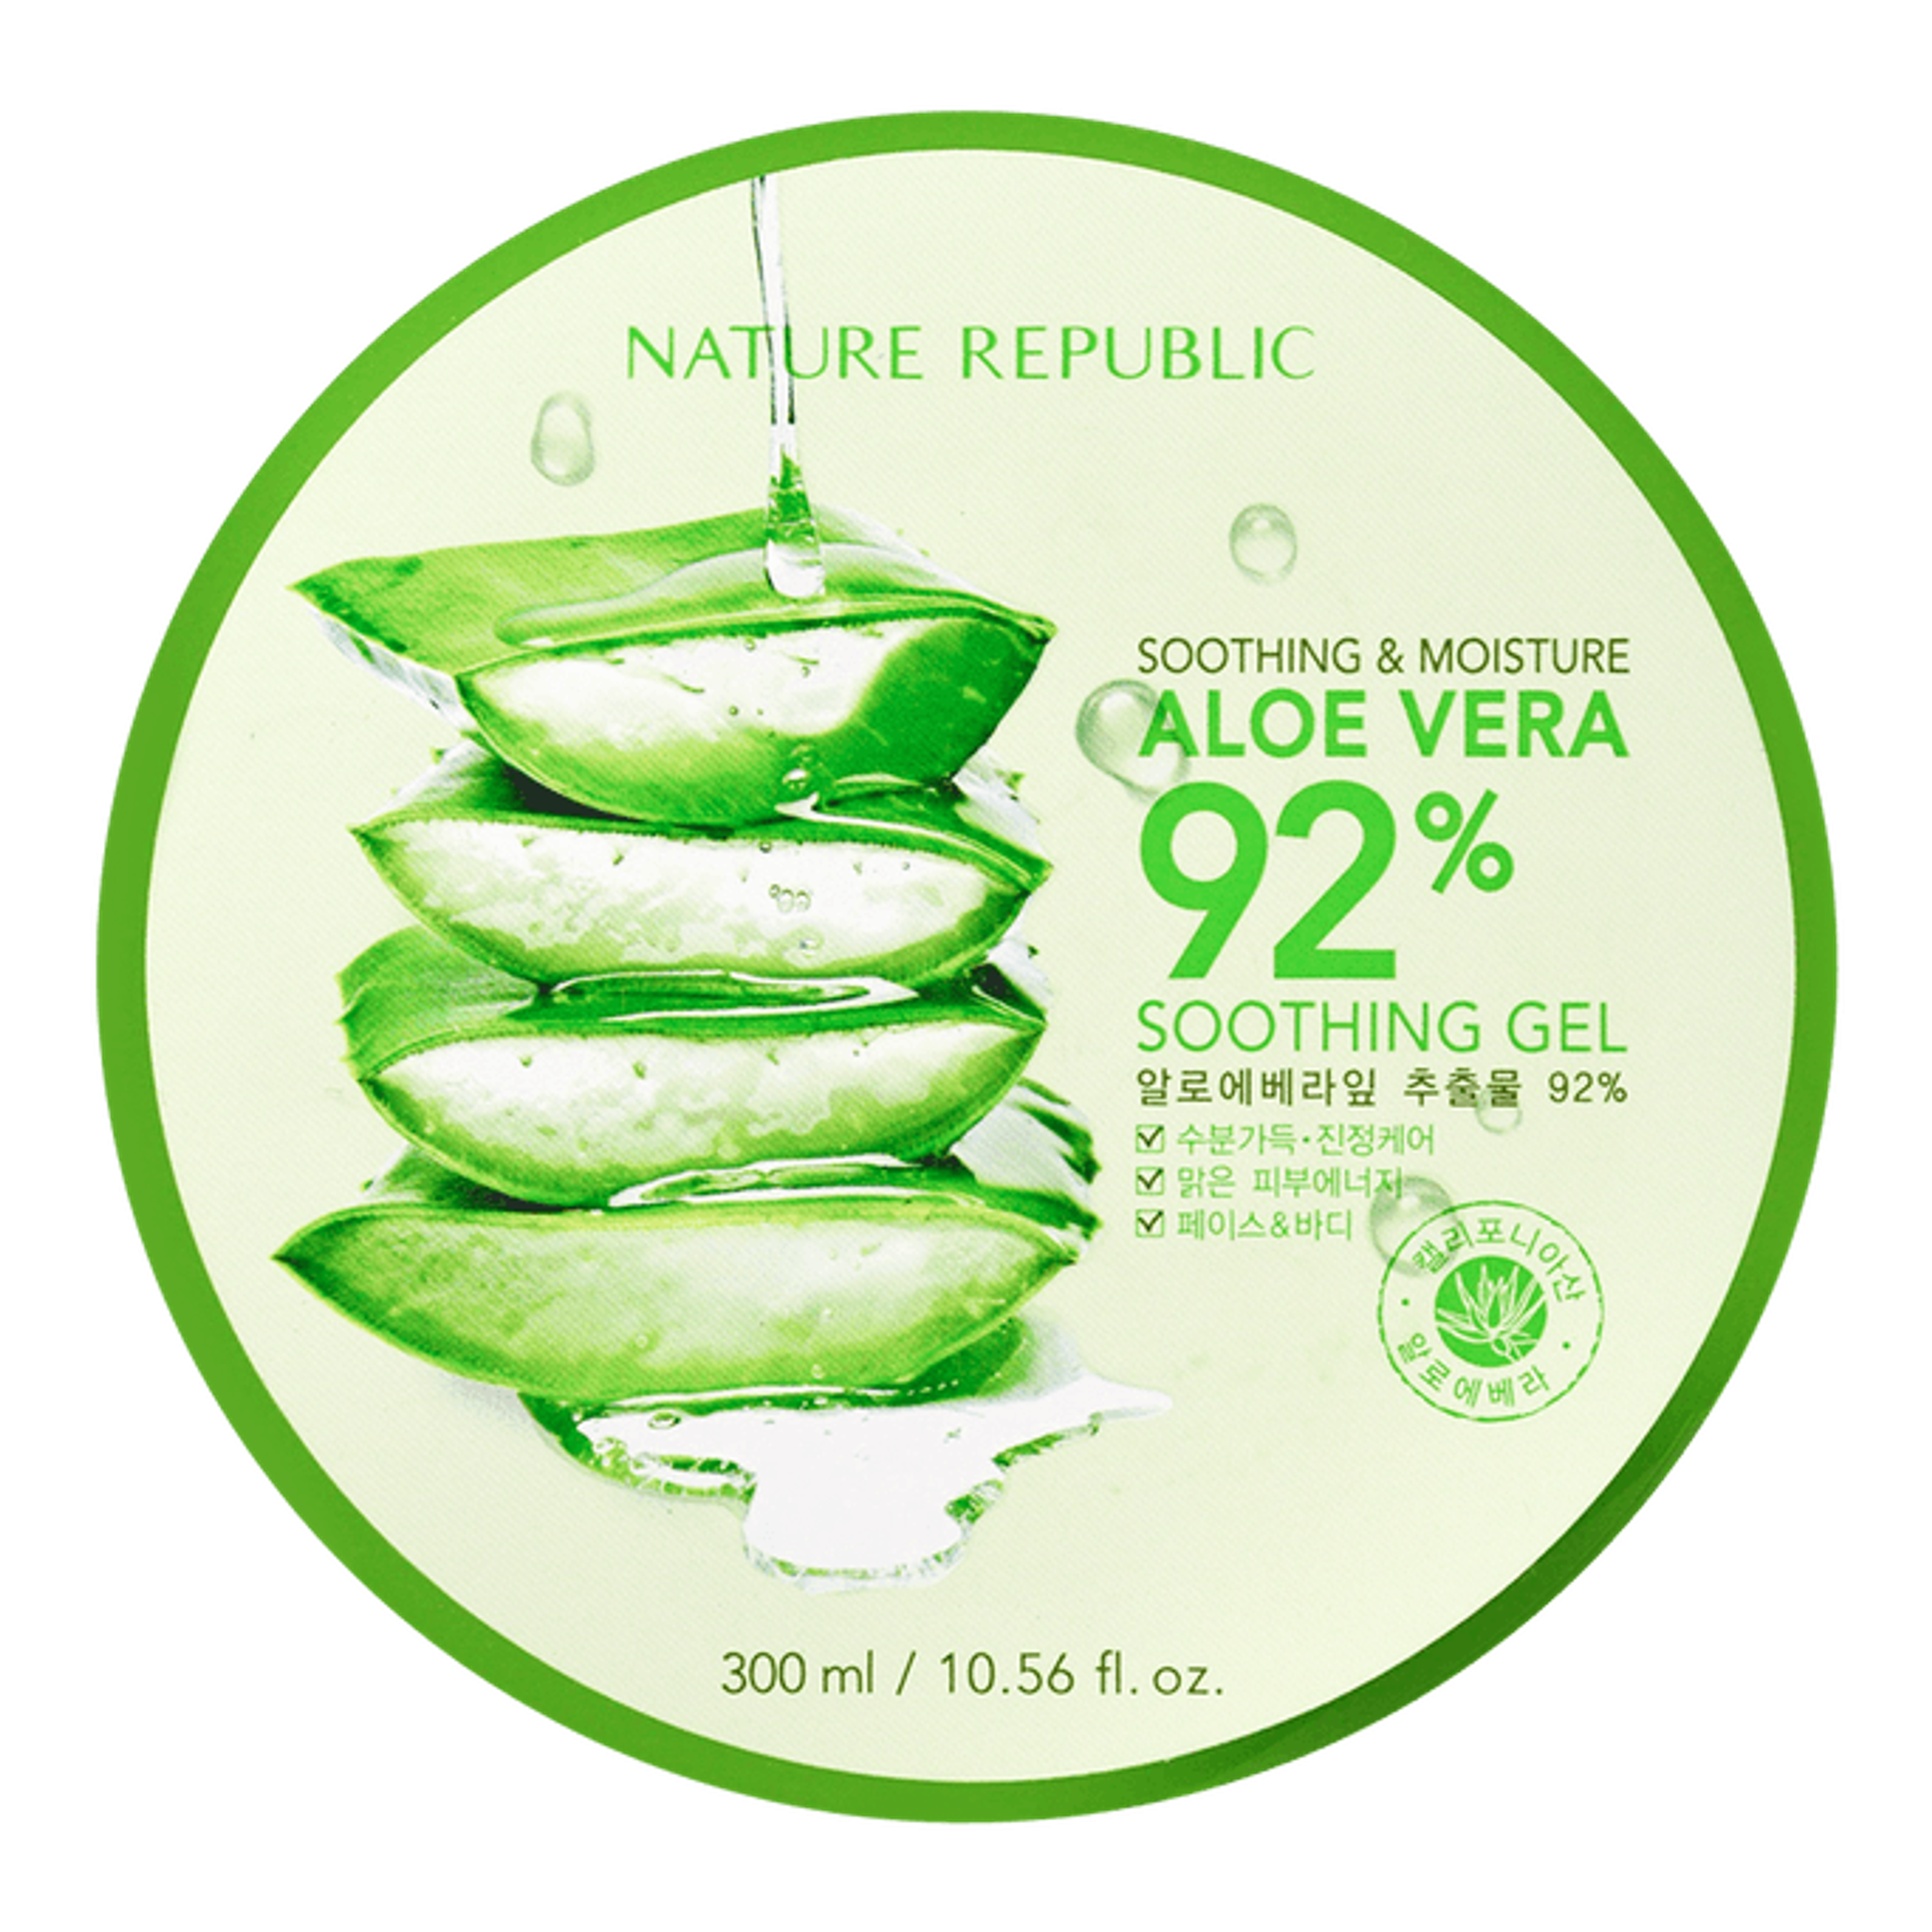 NATURE REPUBLIC Soothing And Moisture Aloe Vera 92% Soothing Gel, 300ml | Yami